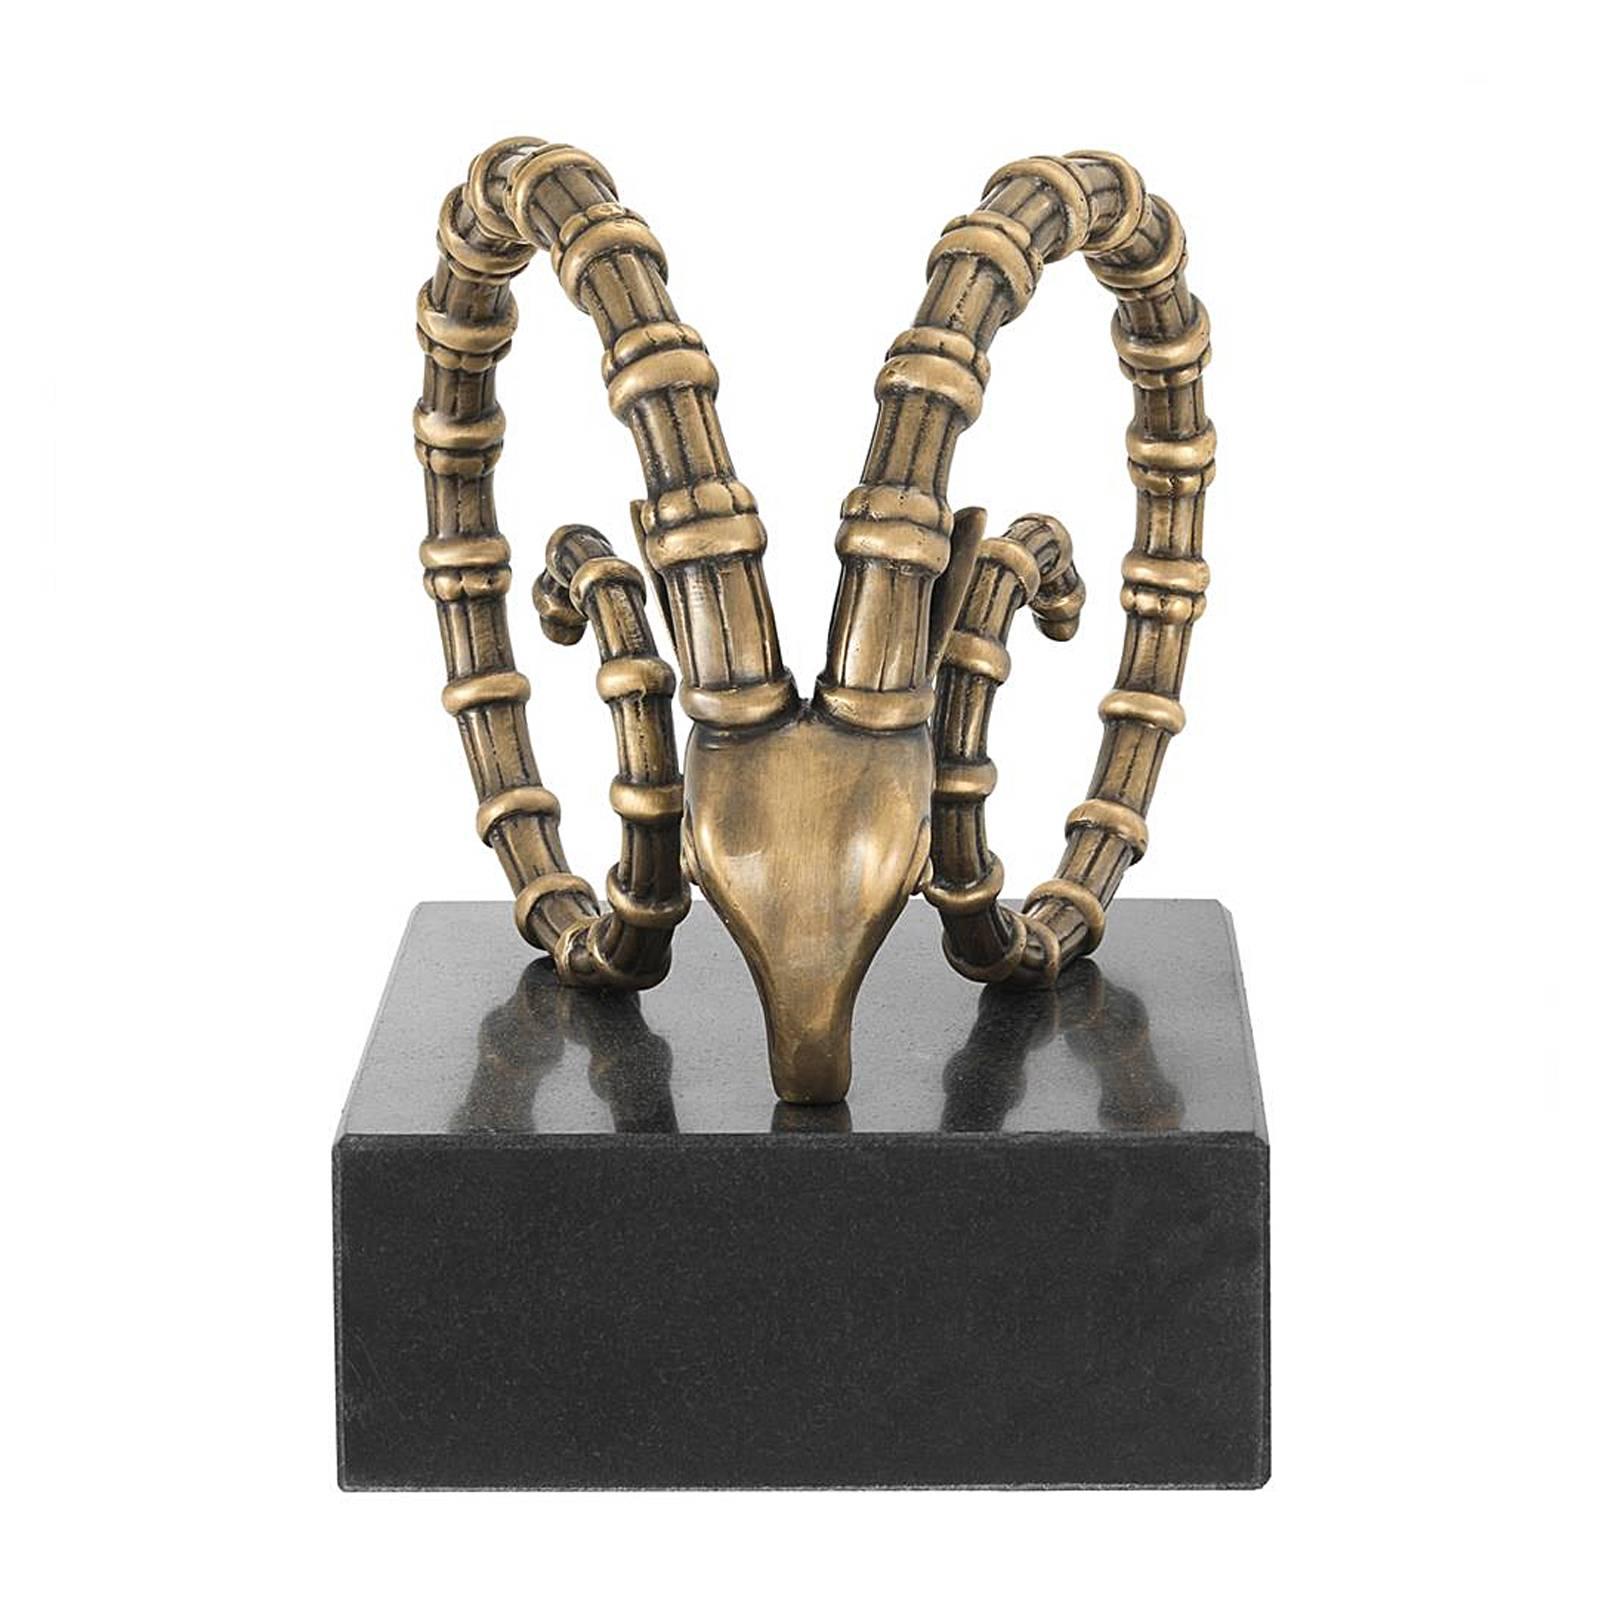 Contemporary Calabra Brass Bookends, Set of Two in Brass Finish and Granite